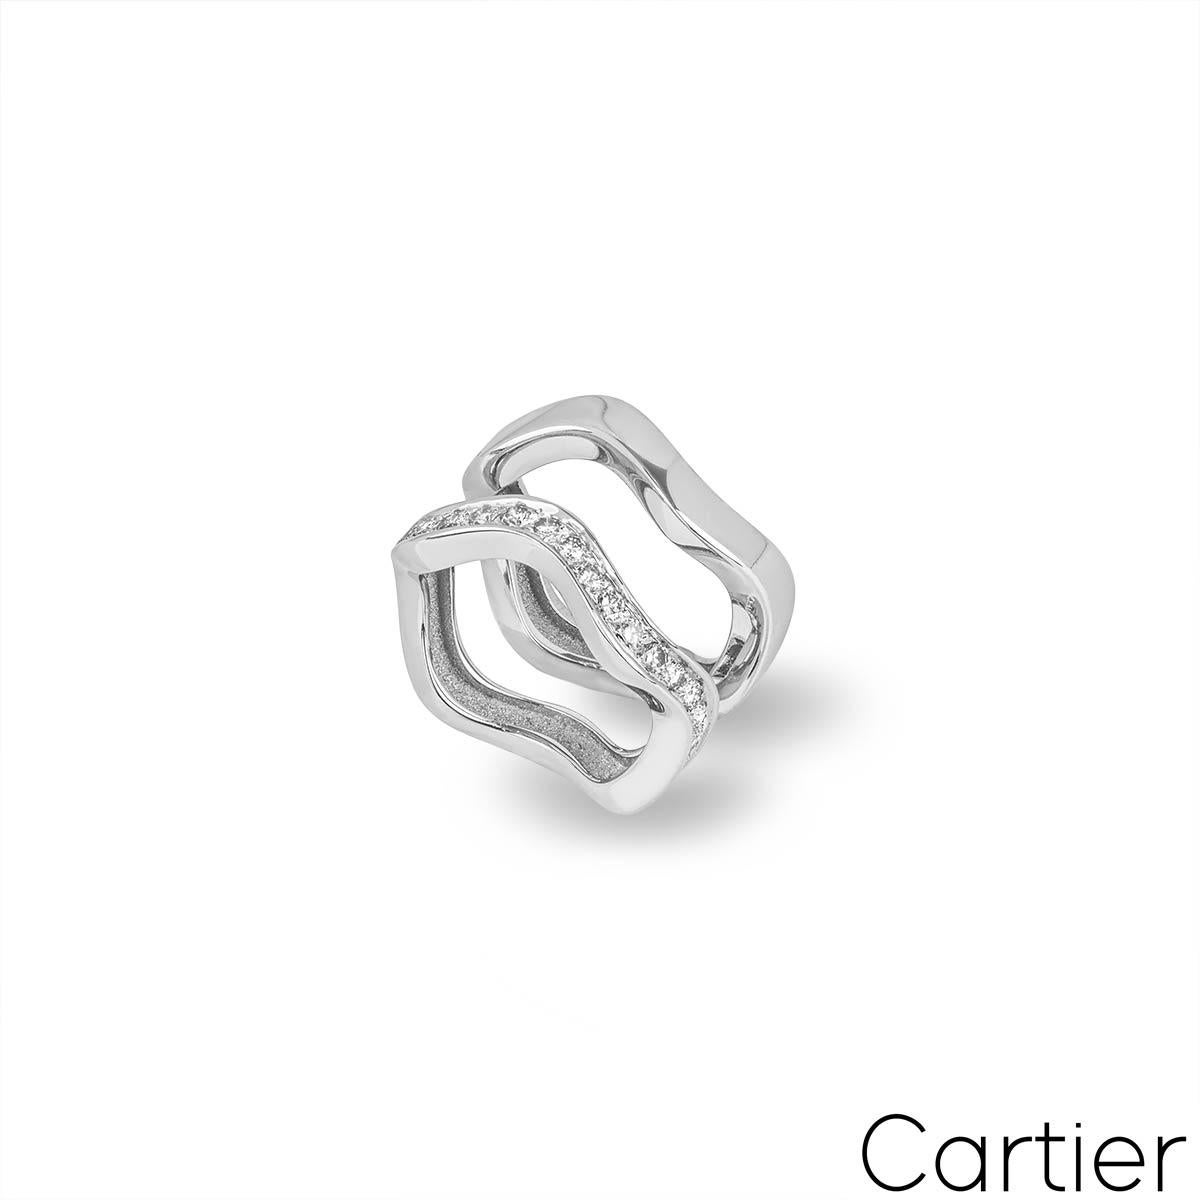 A beautiful 18k white gold double stacker ring by Cartier. The ring is composed of 2 waved bands. One band is pave set with 19 round brilliant cut diamonds totalling approximately 0.57ct, predominantly F in colour and VS-VVS in clarity. Each ring